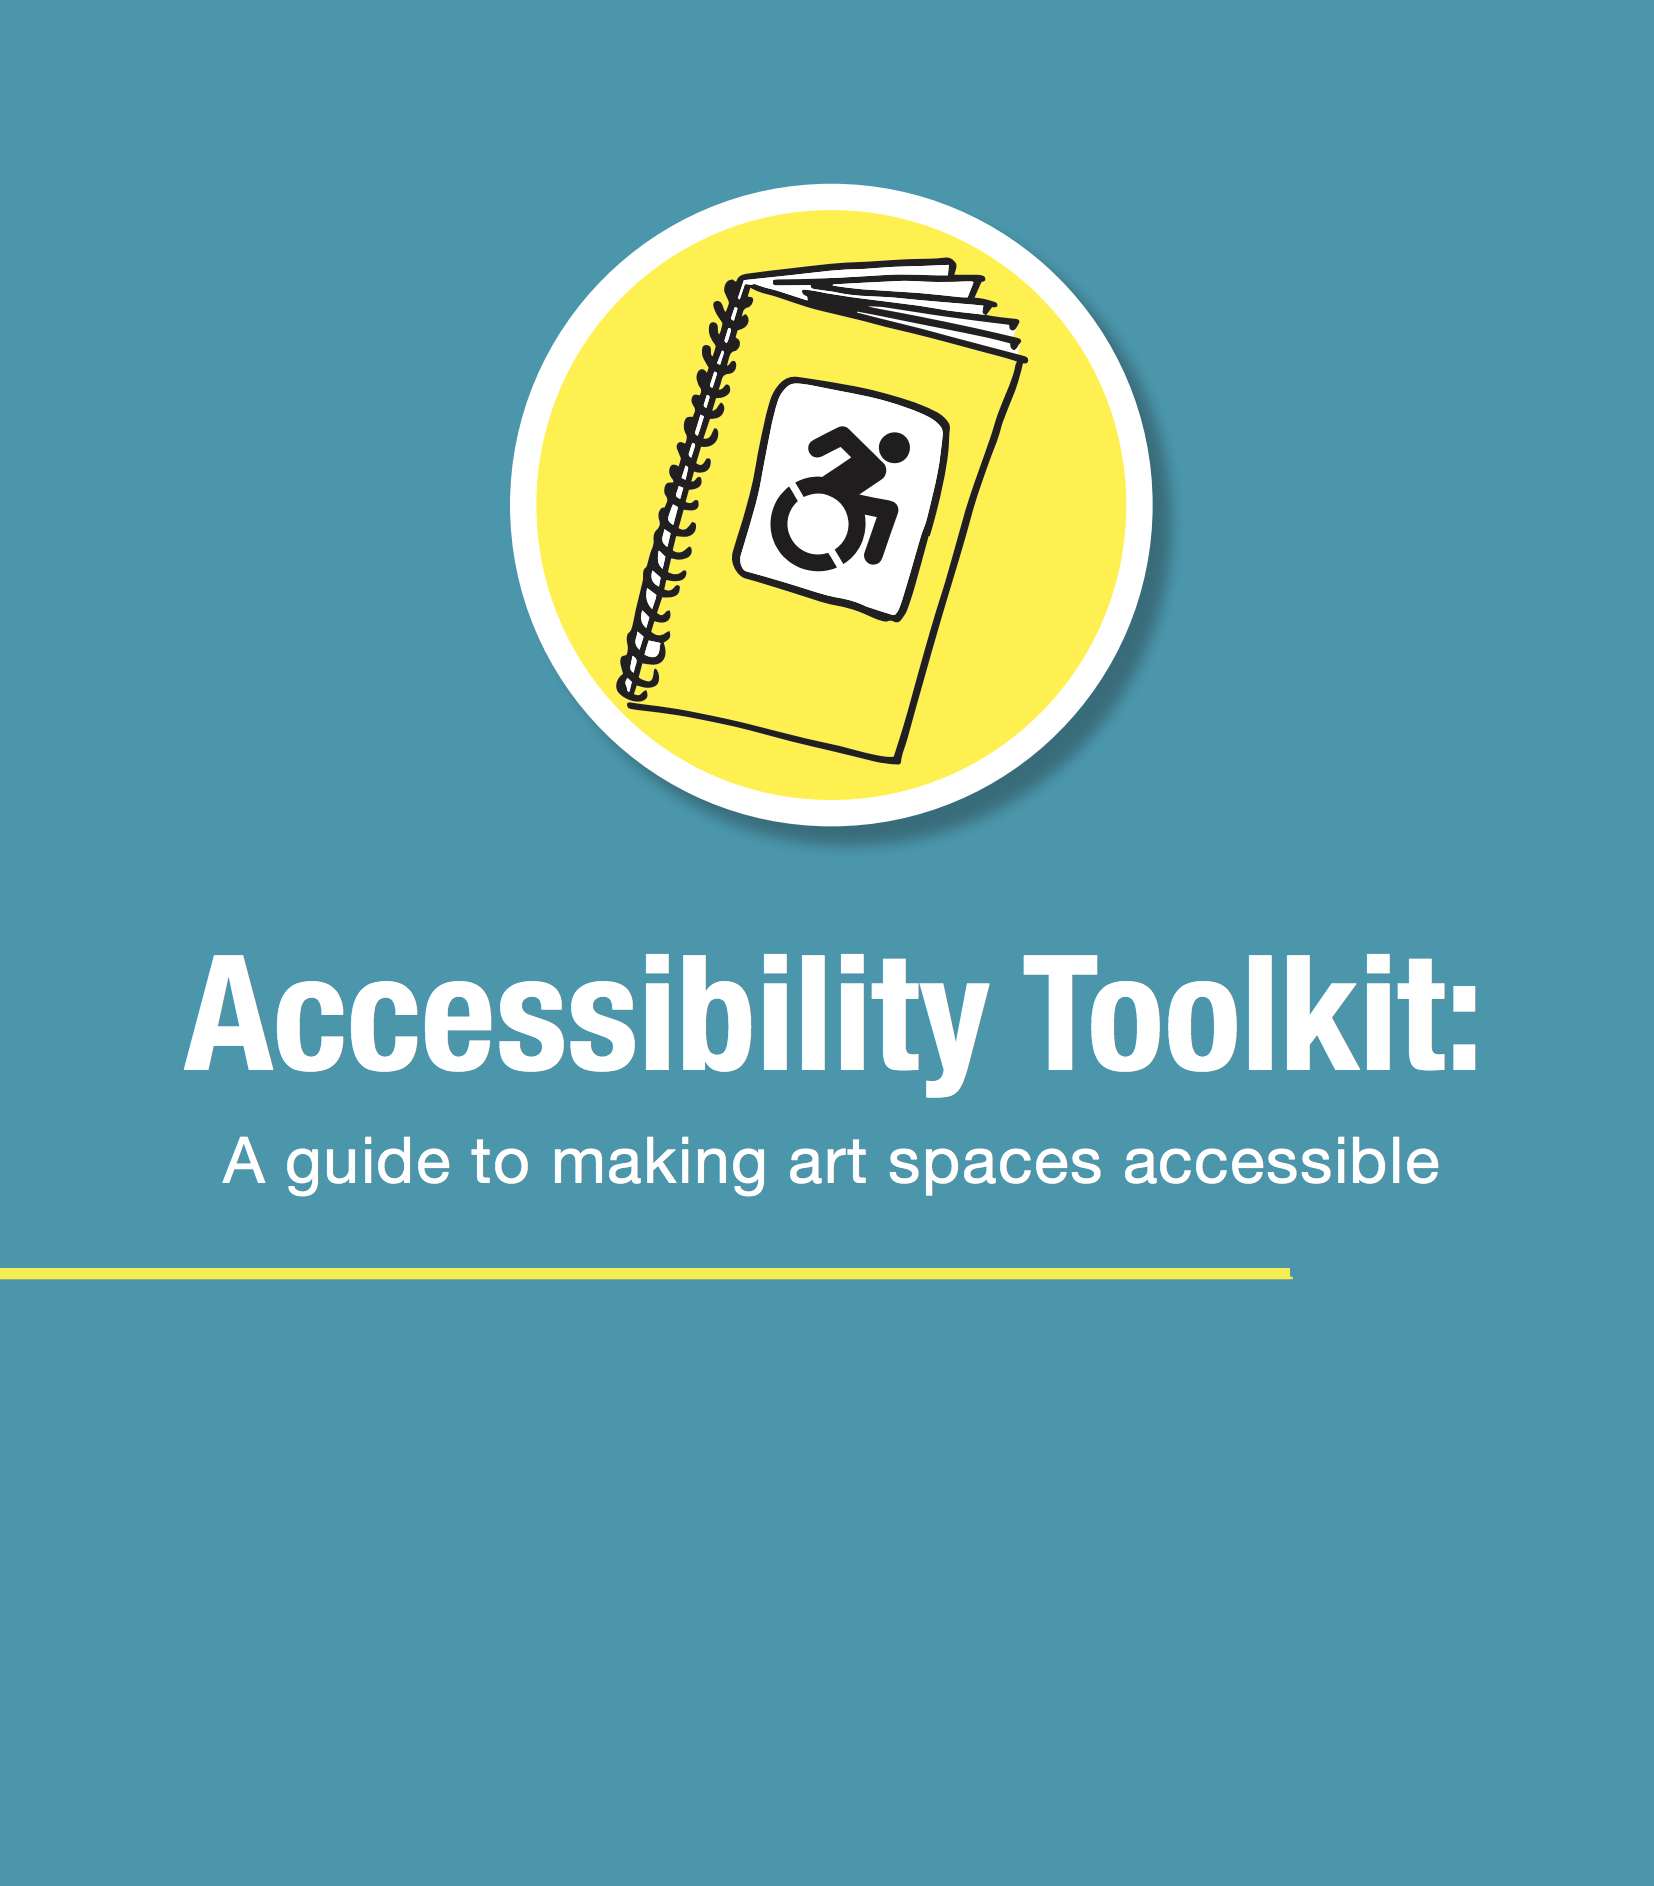 Book cover. Accessibility Toolkit. A guide to making art spaces accessible.